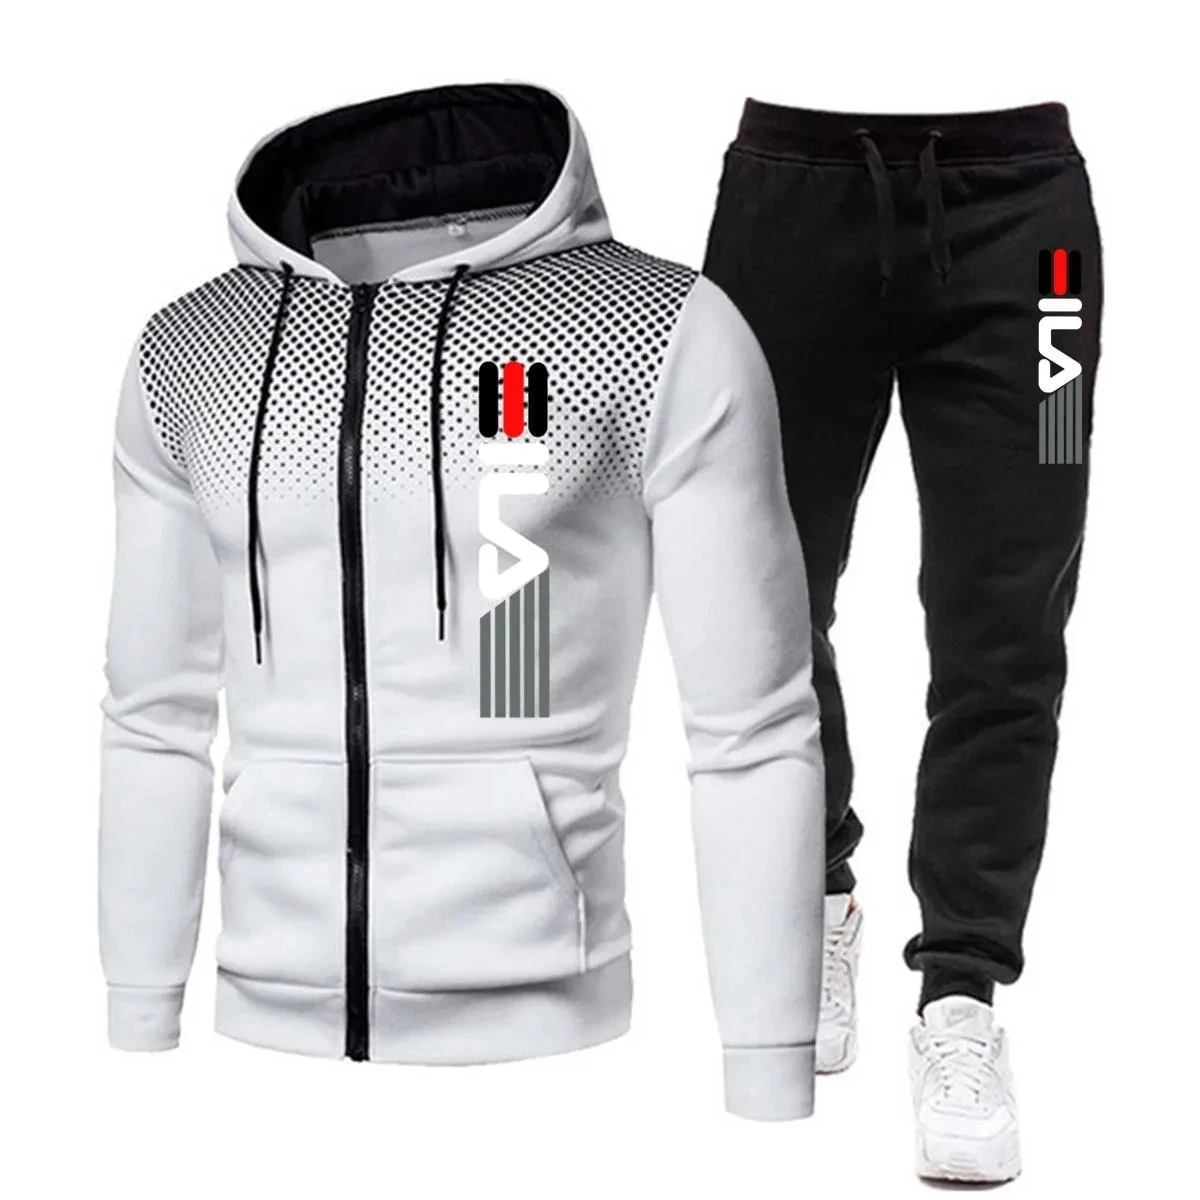 Fashion large size loose printed men's sportswear zipper hoodie + trousers two-piece leisure fitness jogging suit